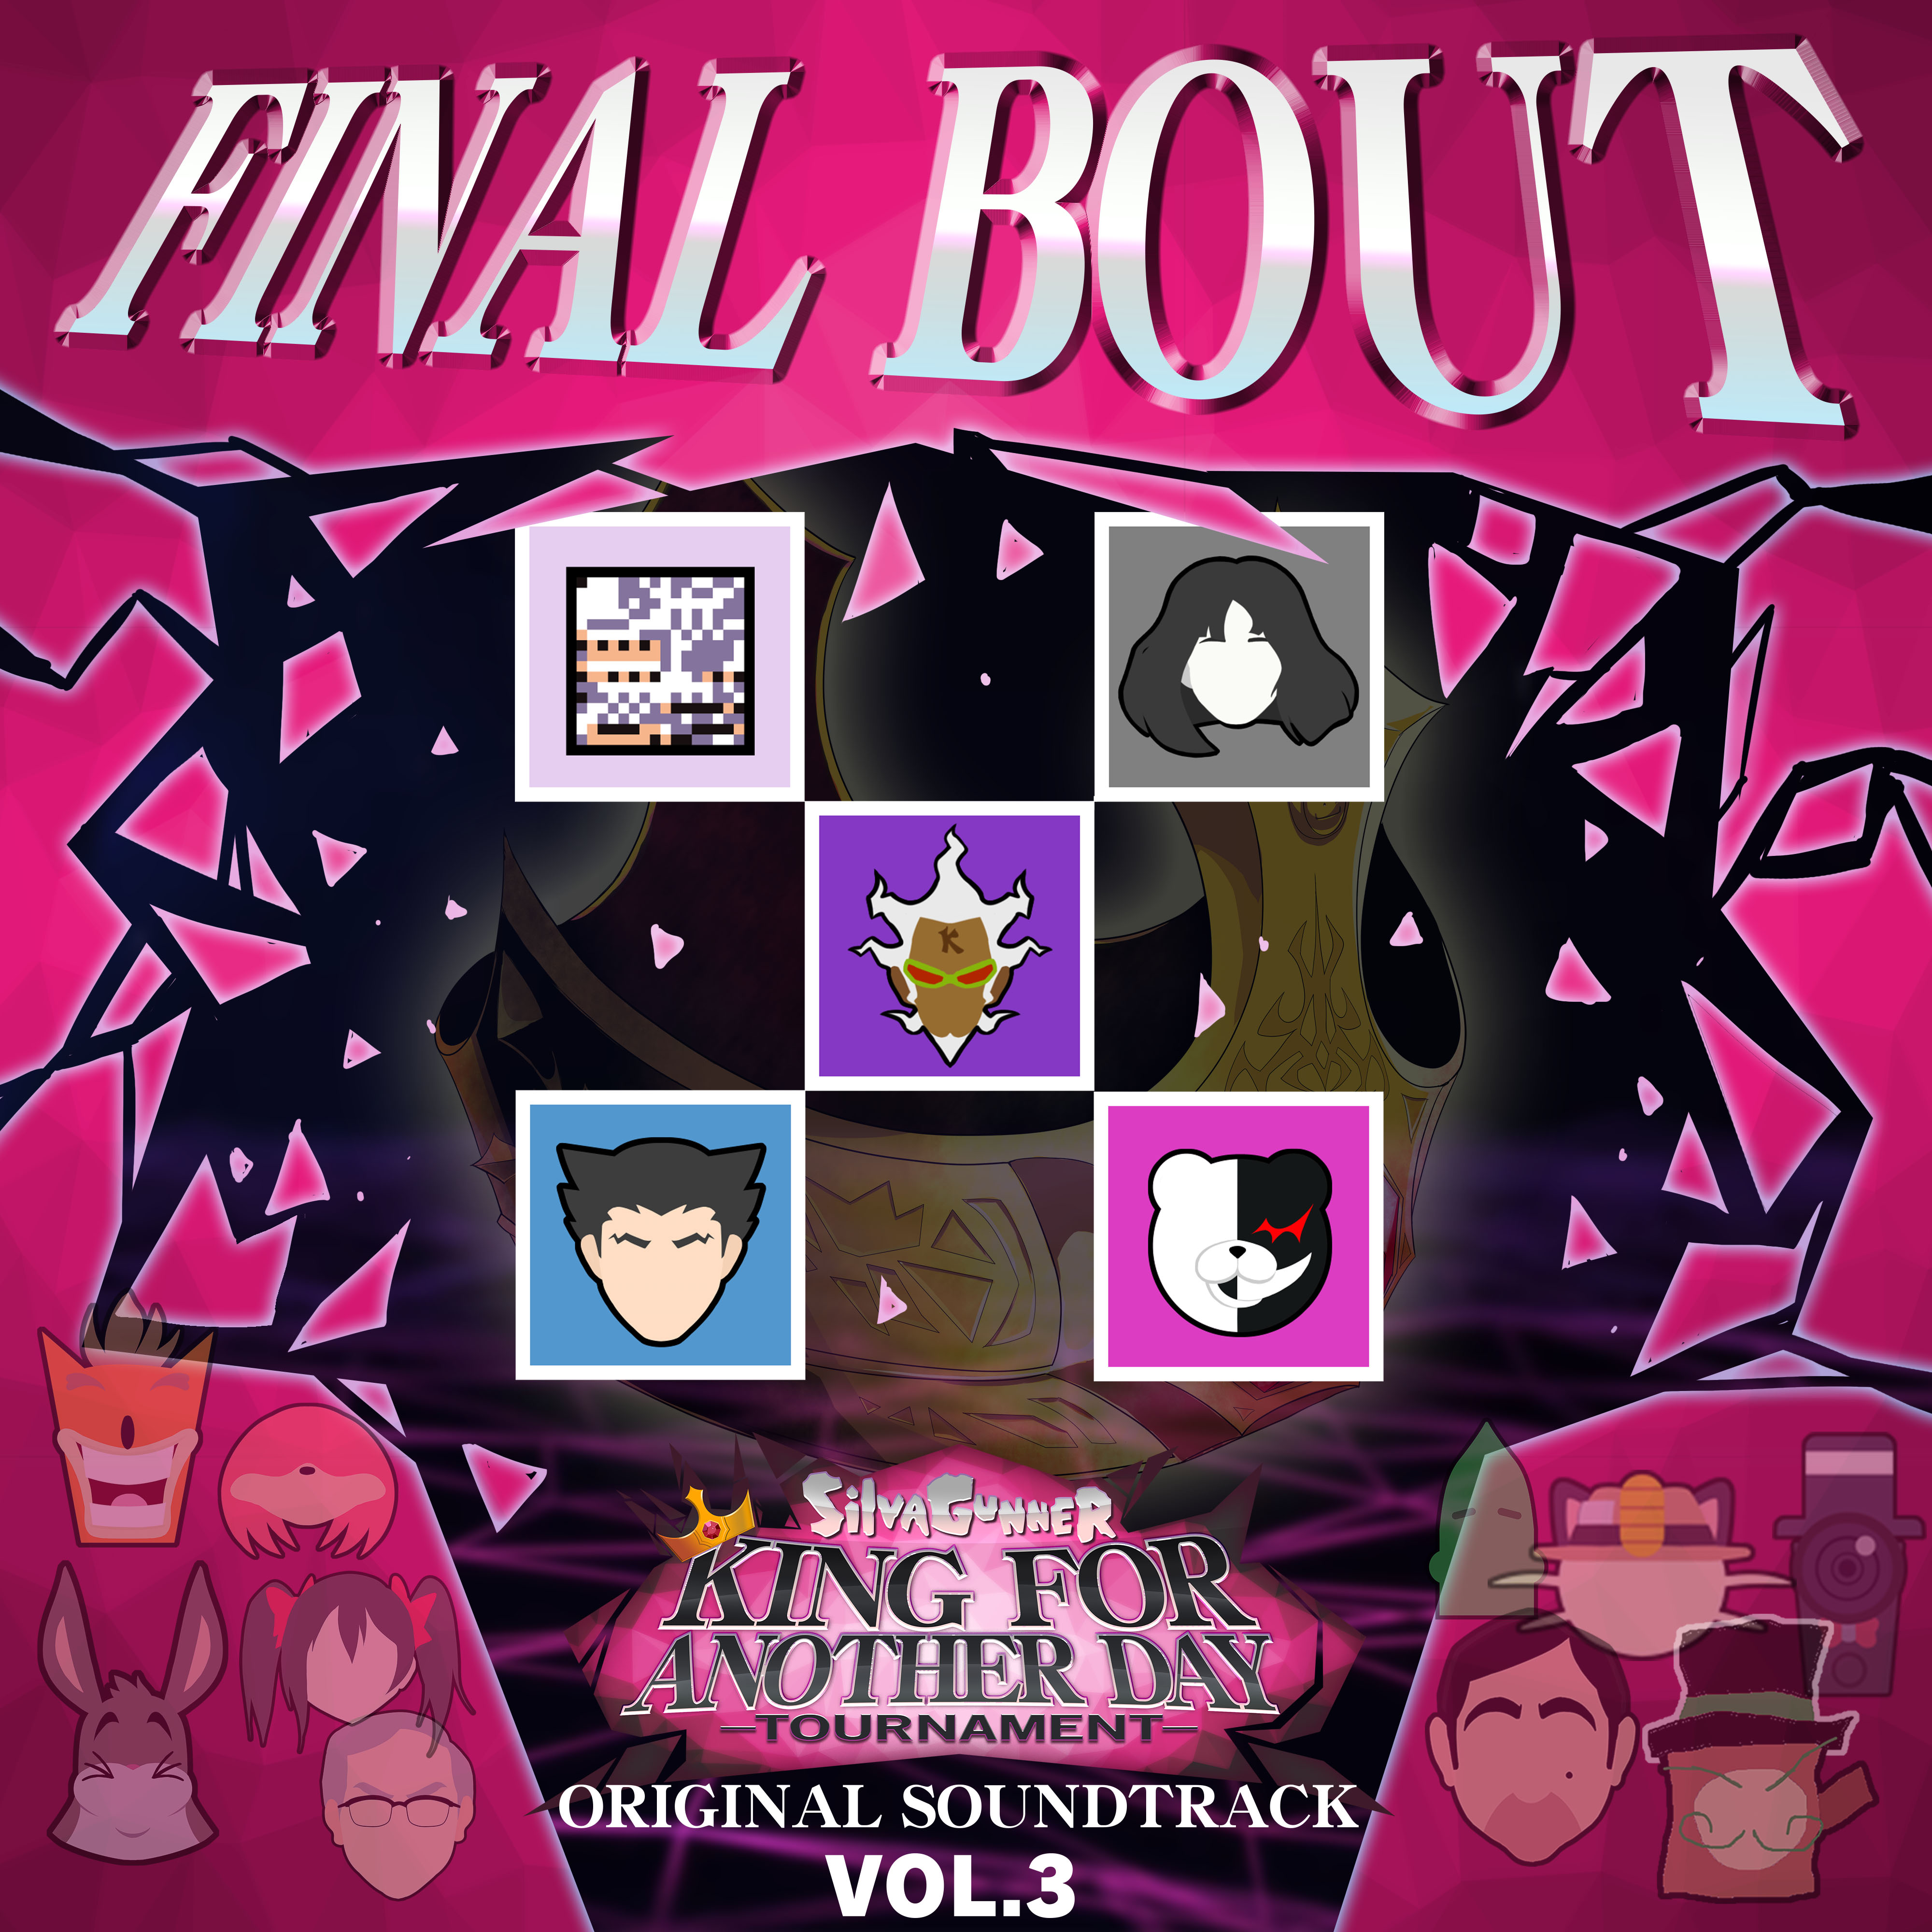 FINAL BOUT ~ SiIvaGunner: King for Another Day Tournament Original